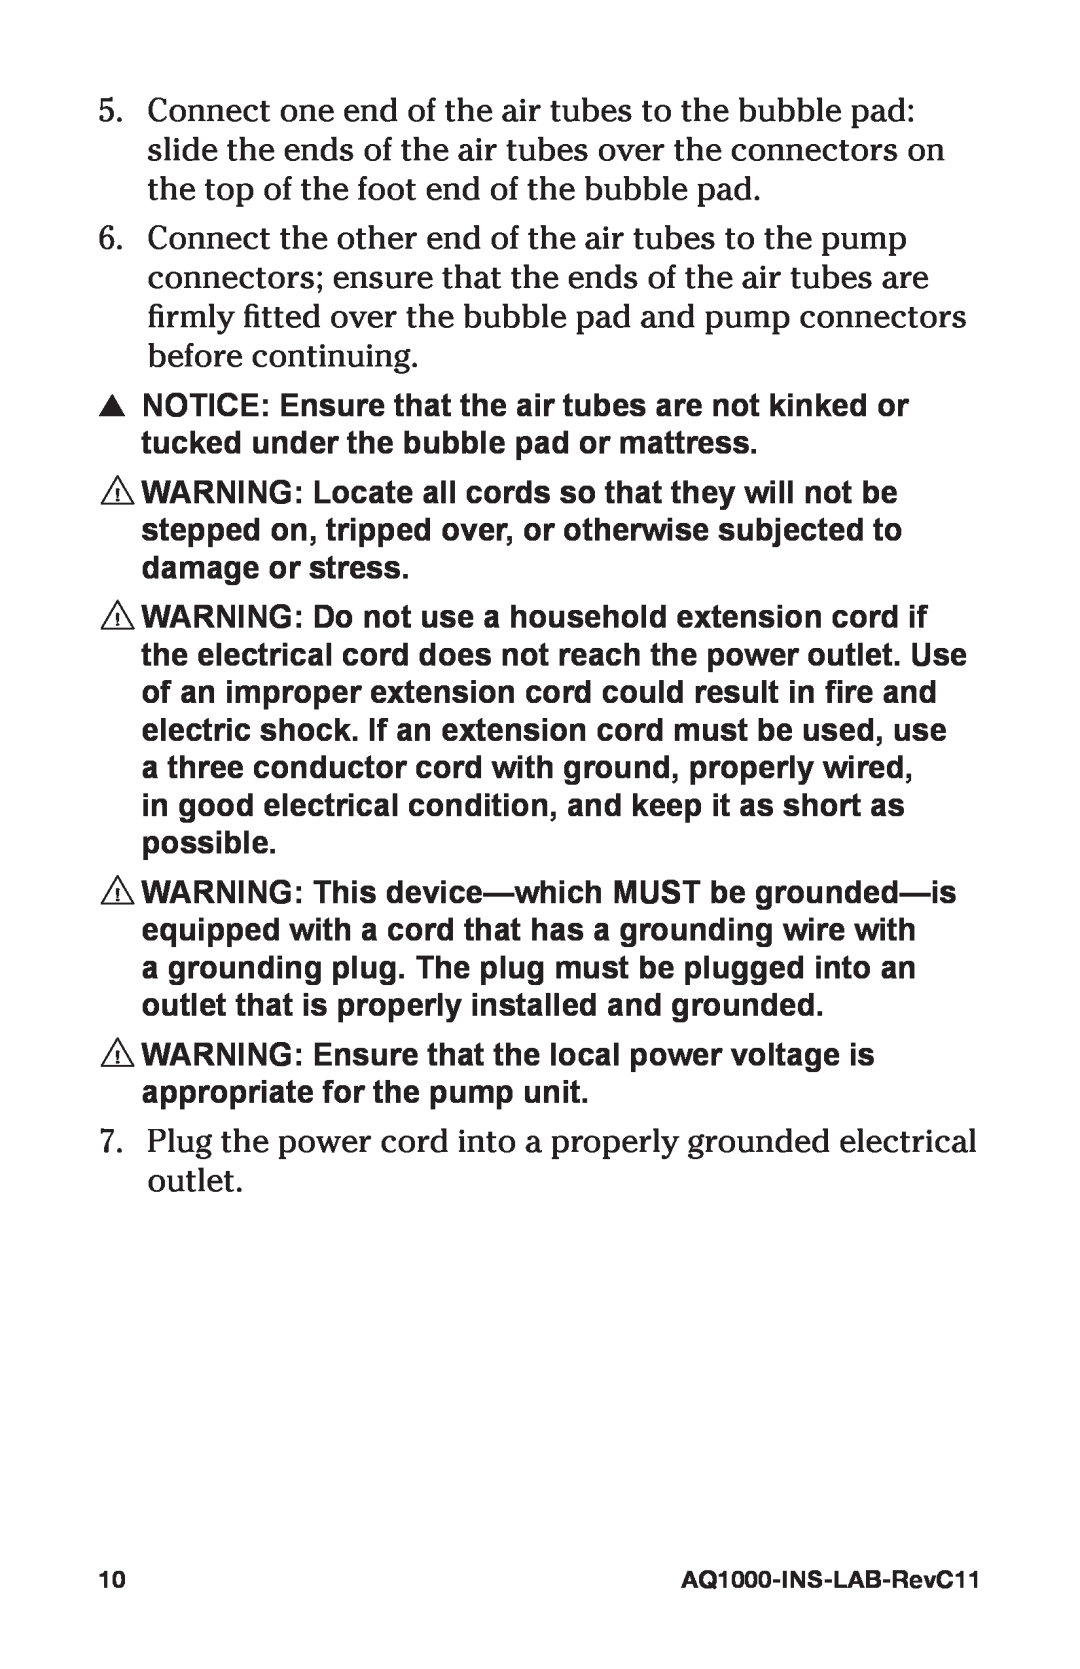 Graham Field AQ1000/AQ2000 user manual Plug the power cord into a properly grounded electrical outlet 